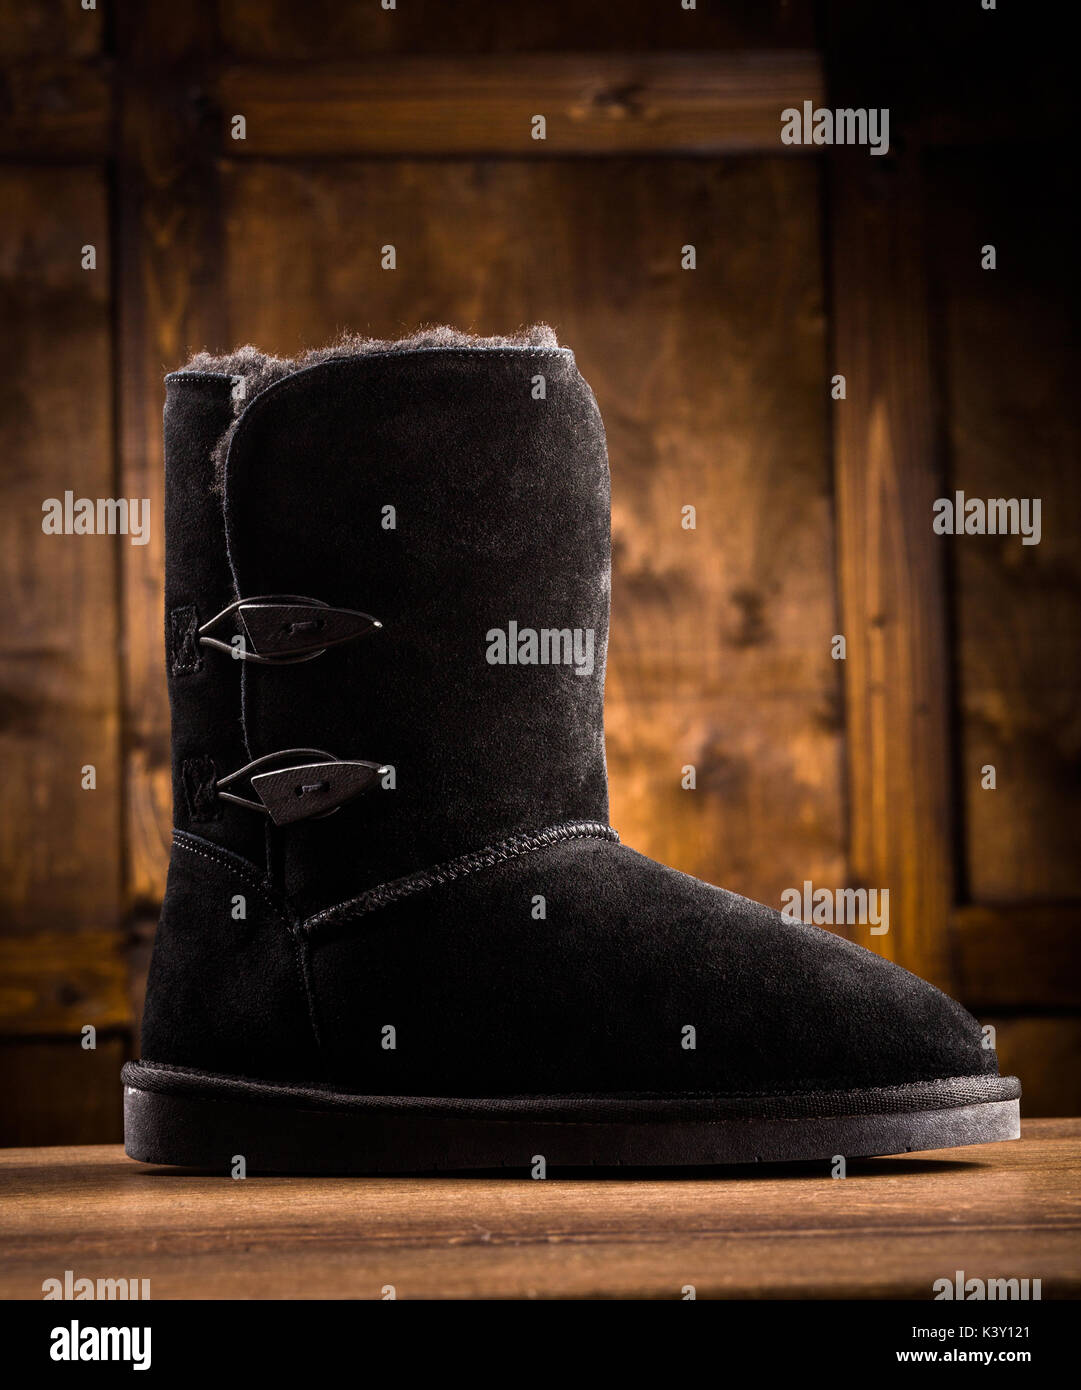 CLose up view of suede black boot. Stock Photo